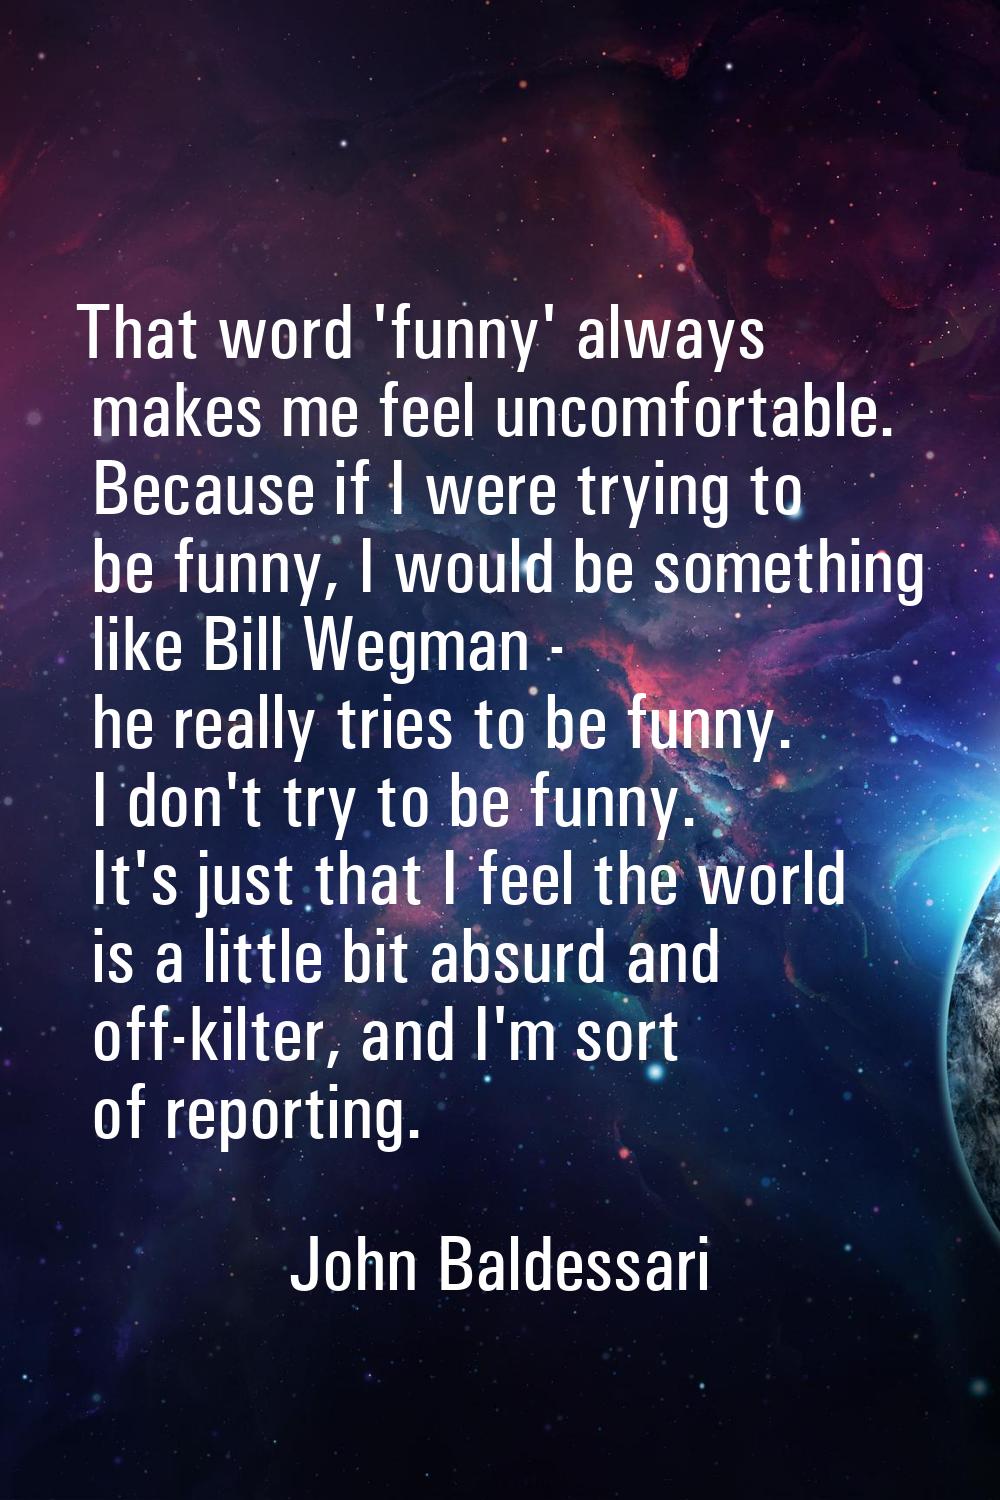 That word 'funny' always makes me feel uncomfortable. Because if I were trying to be funny, I would